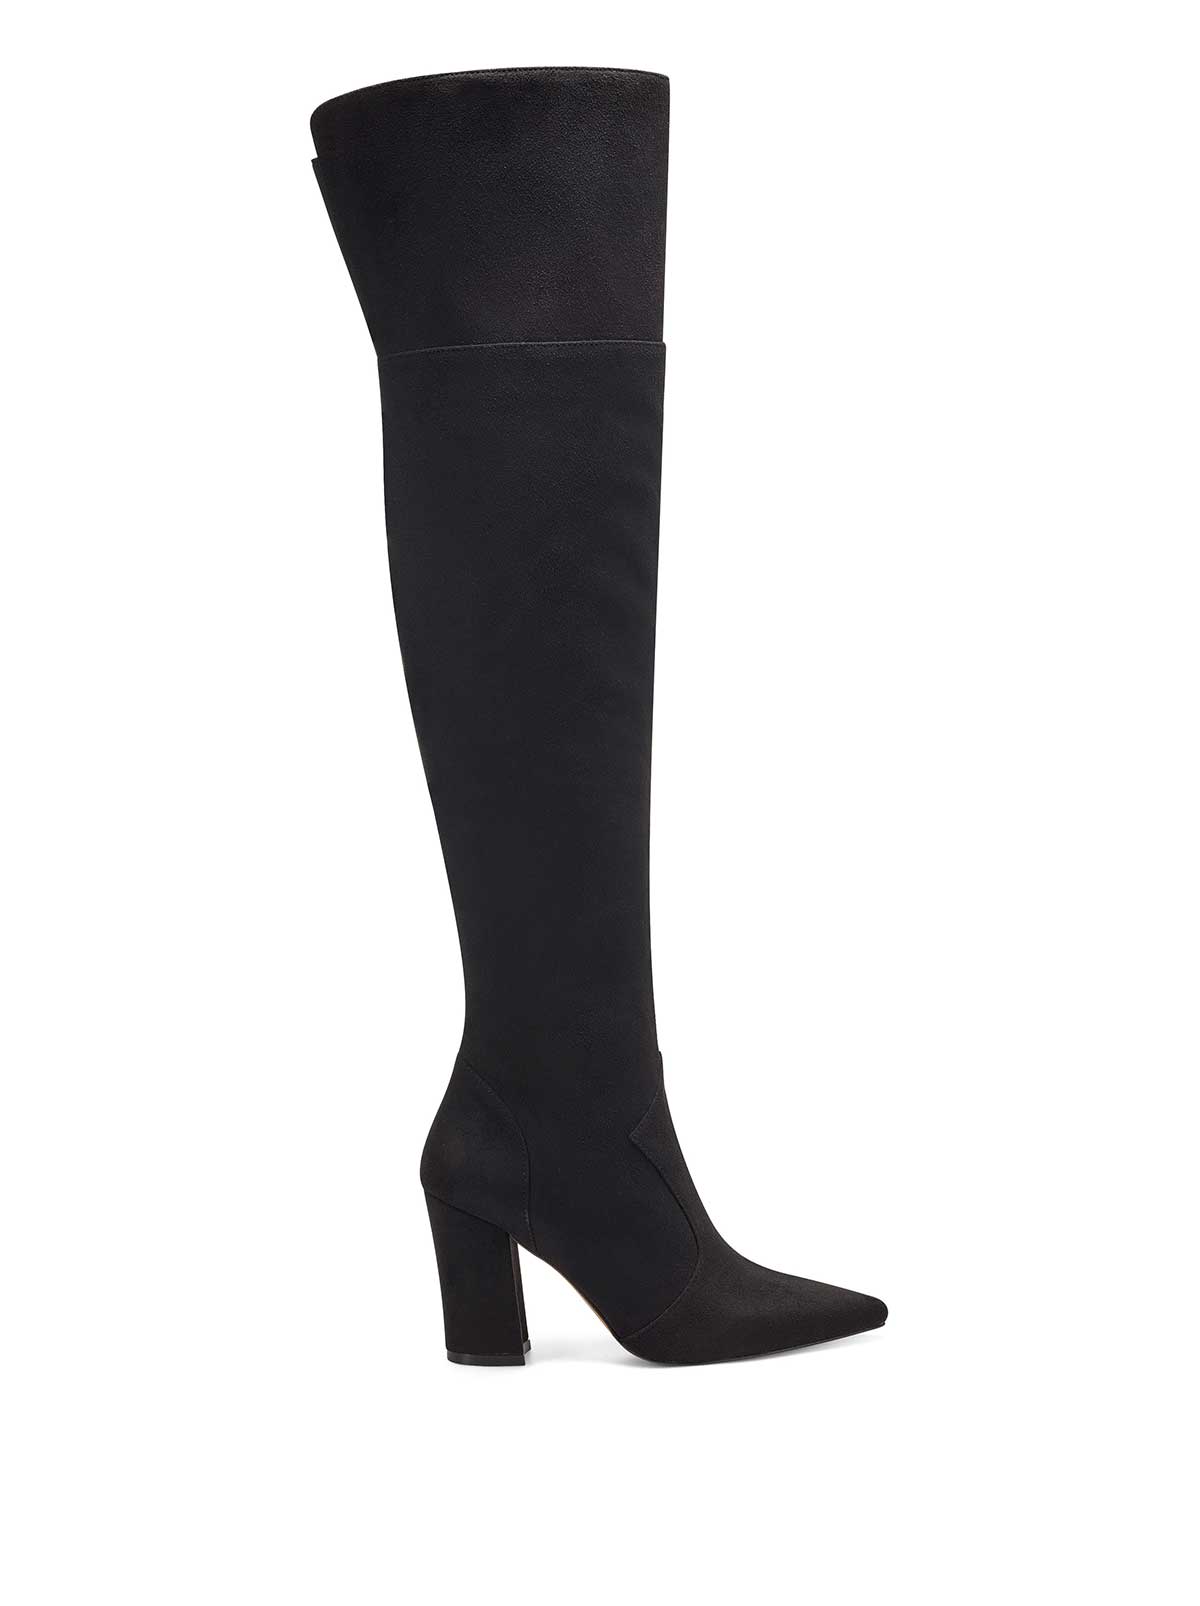 Habella Over the Knee Boot in Black Suede – Jessica Simpson